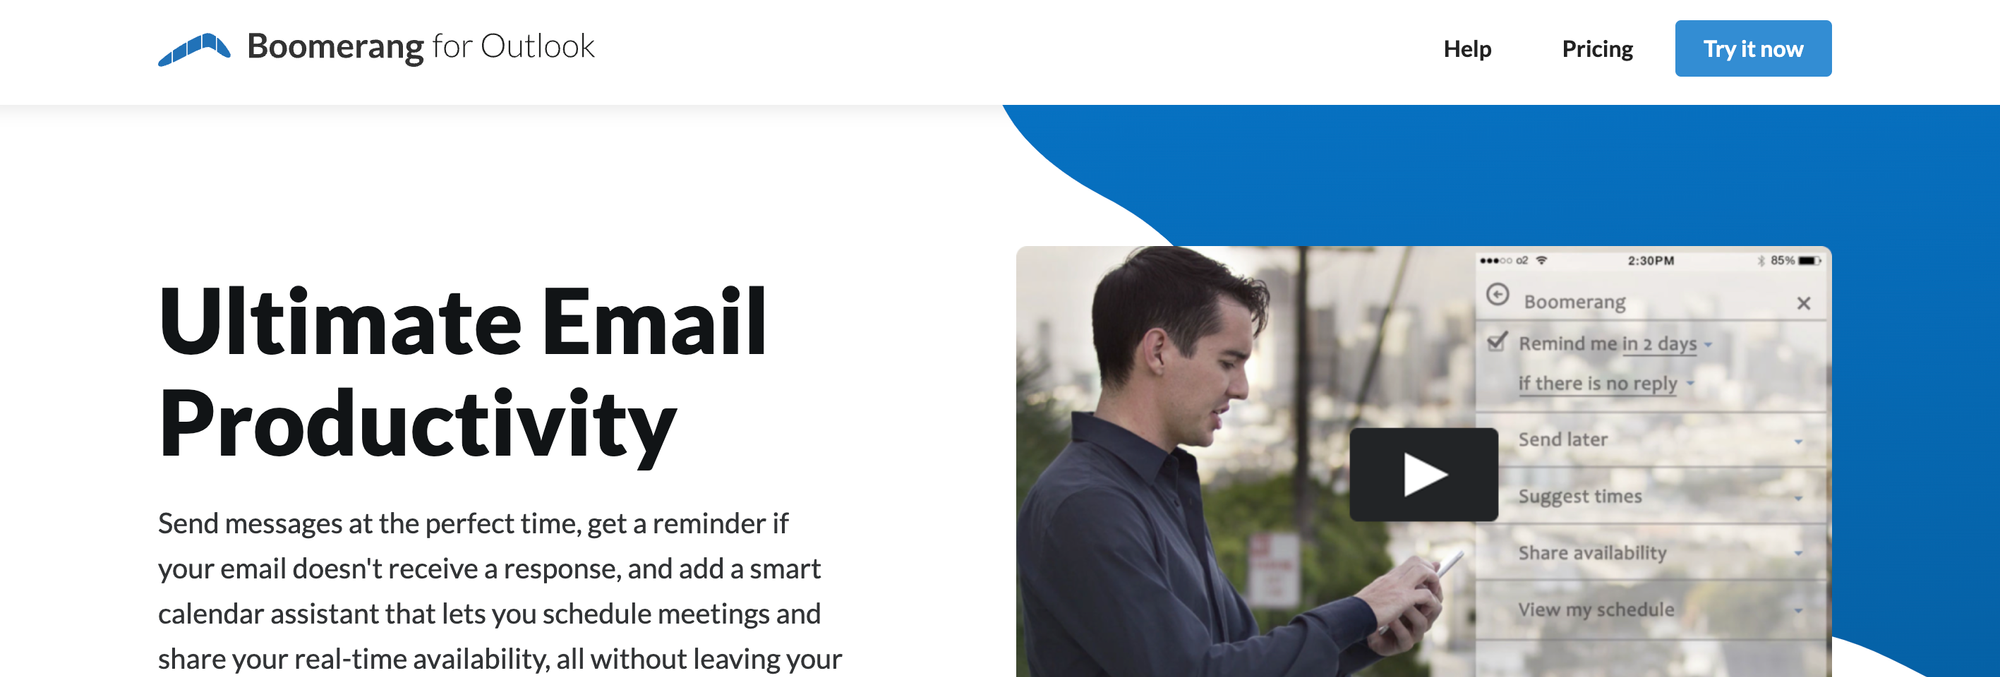 7 Best Email Tracking Software to Integrate with your Gmail and Outlook